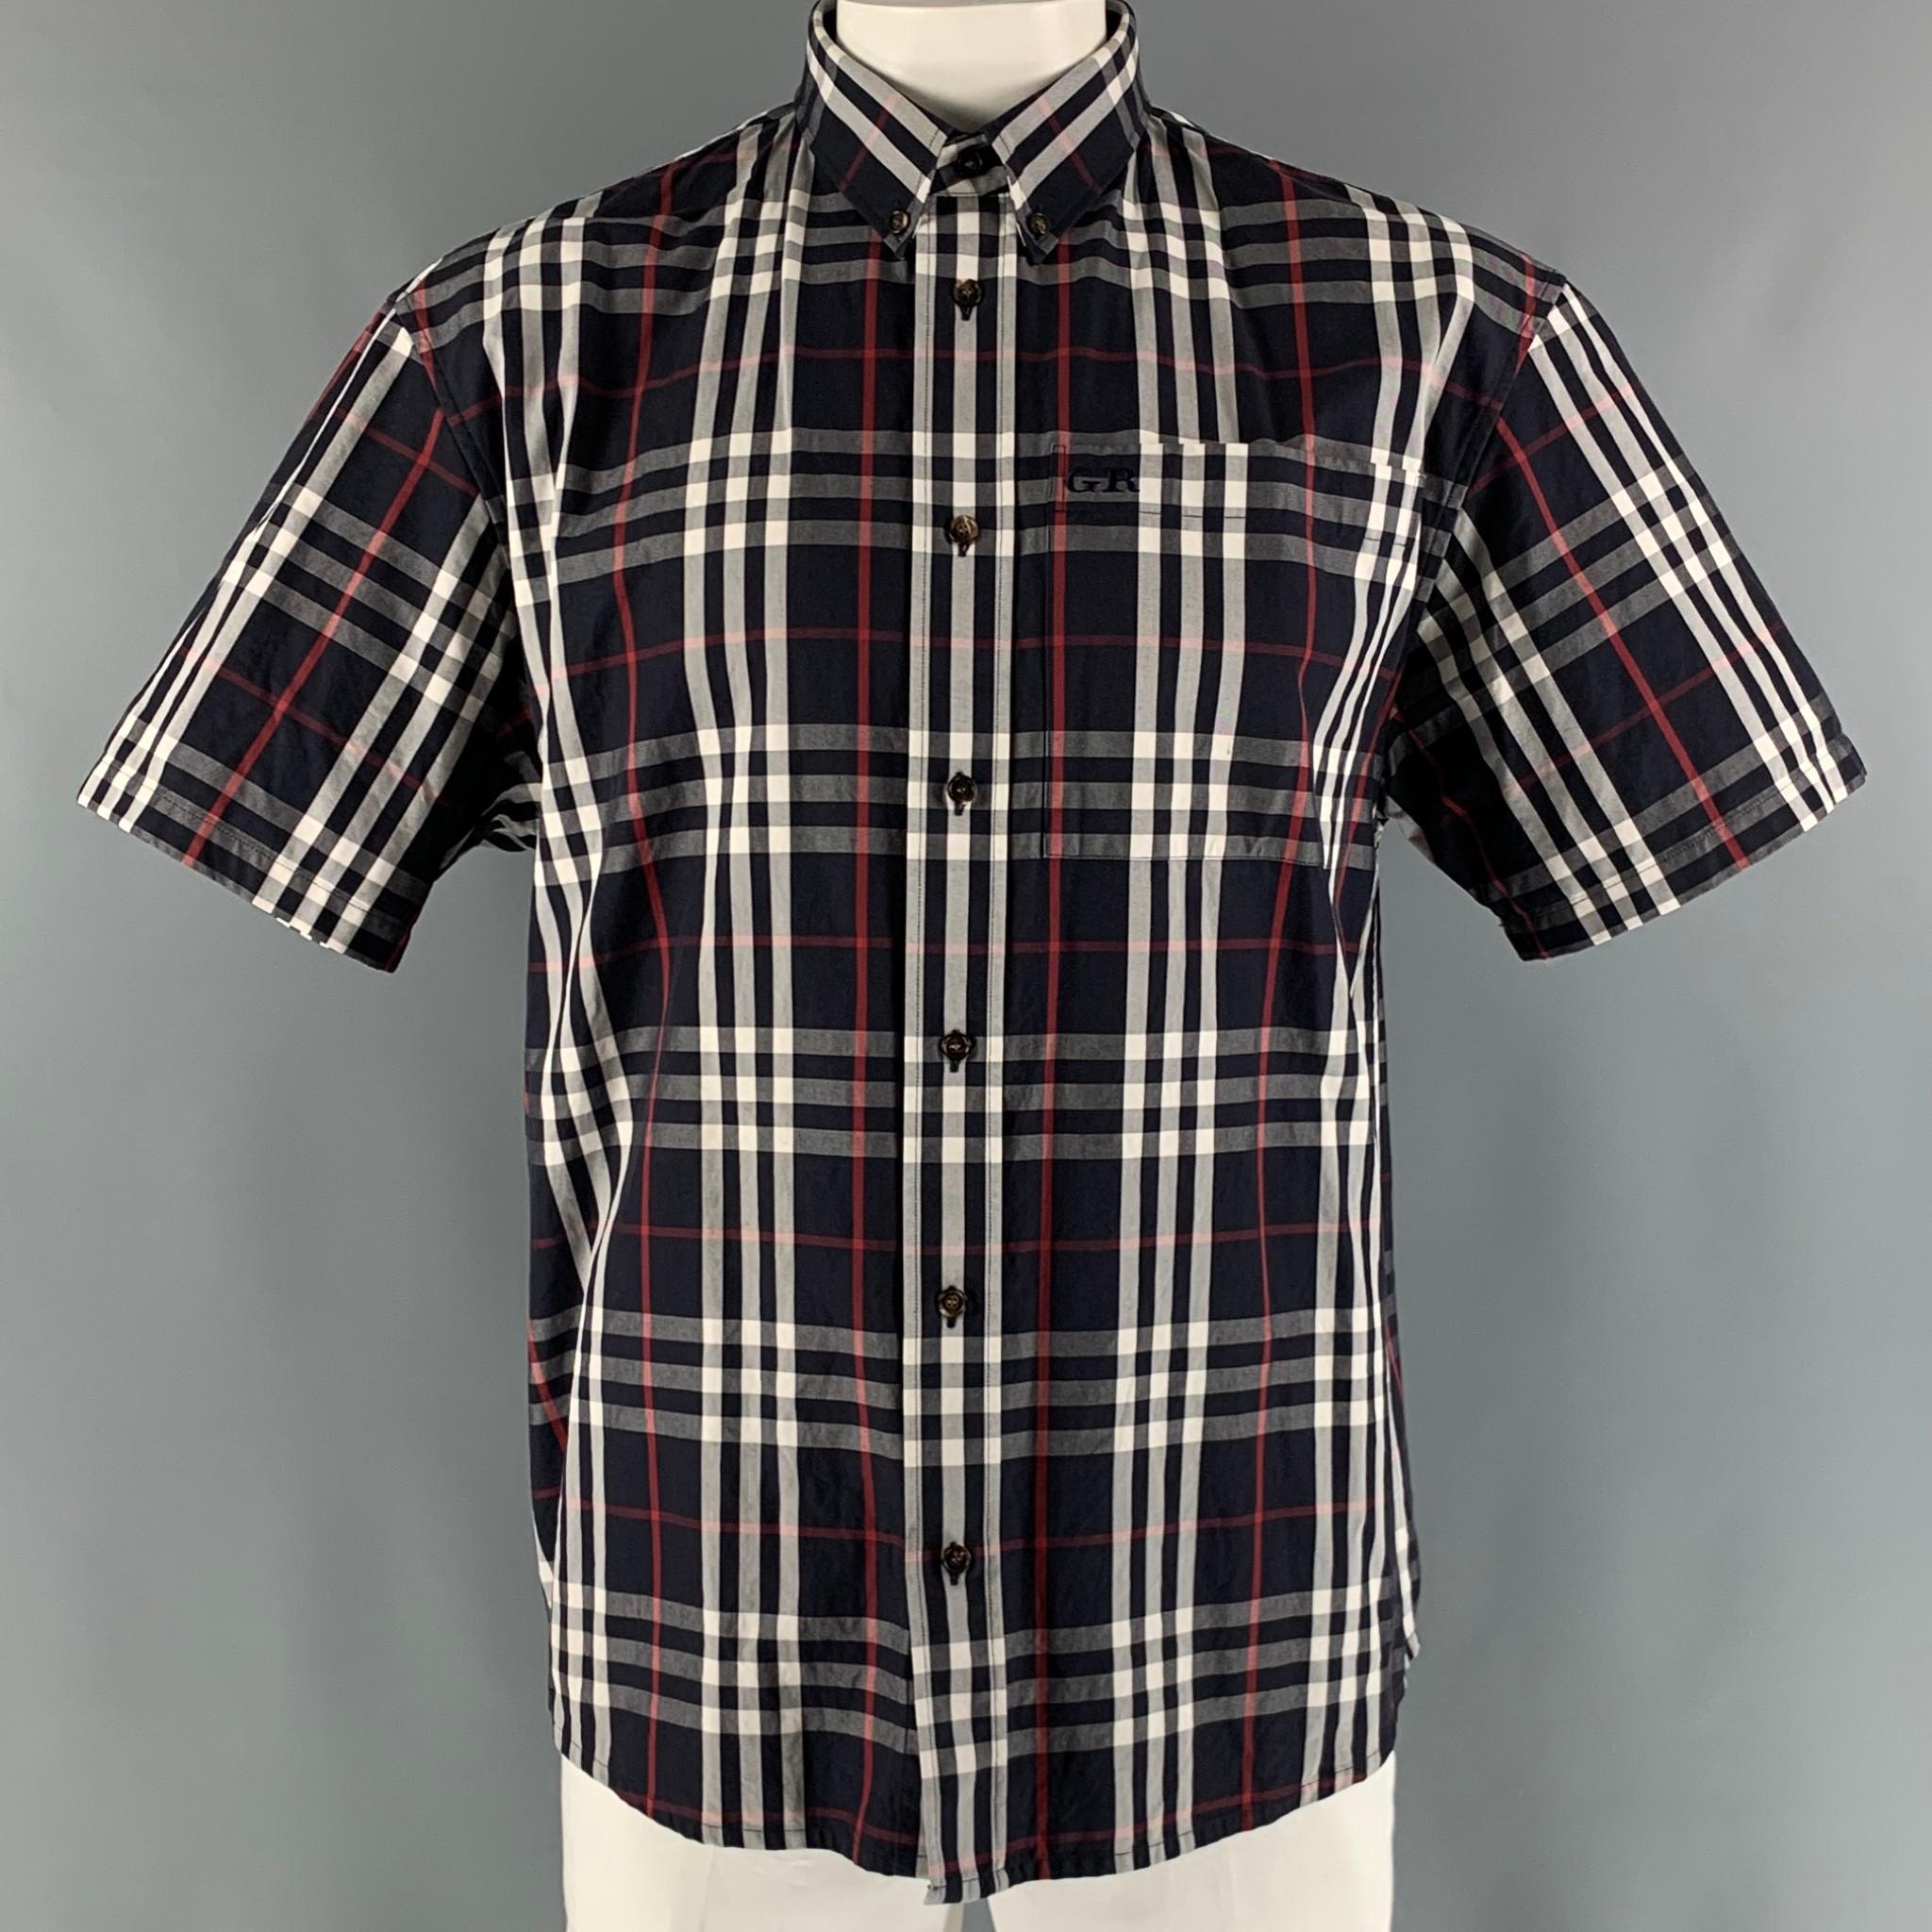 BURBERRY short sleeve shirt comes in a navy, white and red plaid cotton twill material featuring a button down collar, and a button up closure. Made in Italy.

Excellent Pre-Owned Condition.
Marked: L

Measurements:

Shoulder: 22 in.
Chest: 50